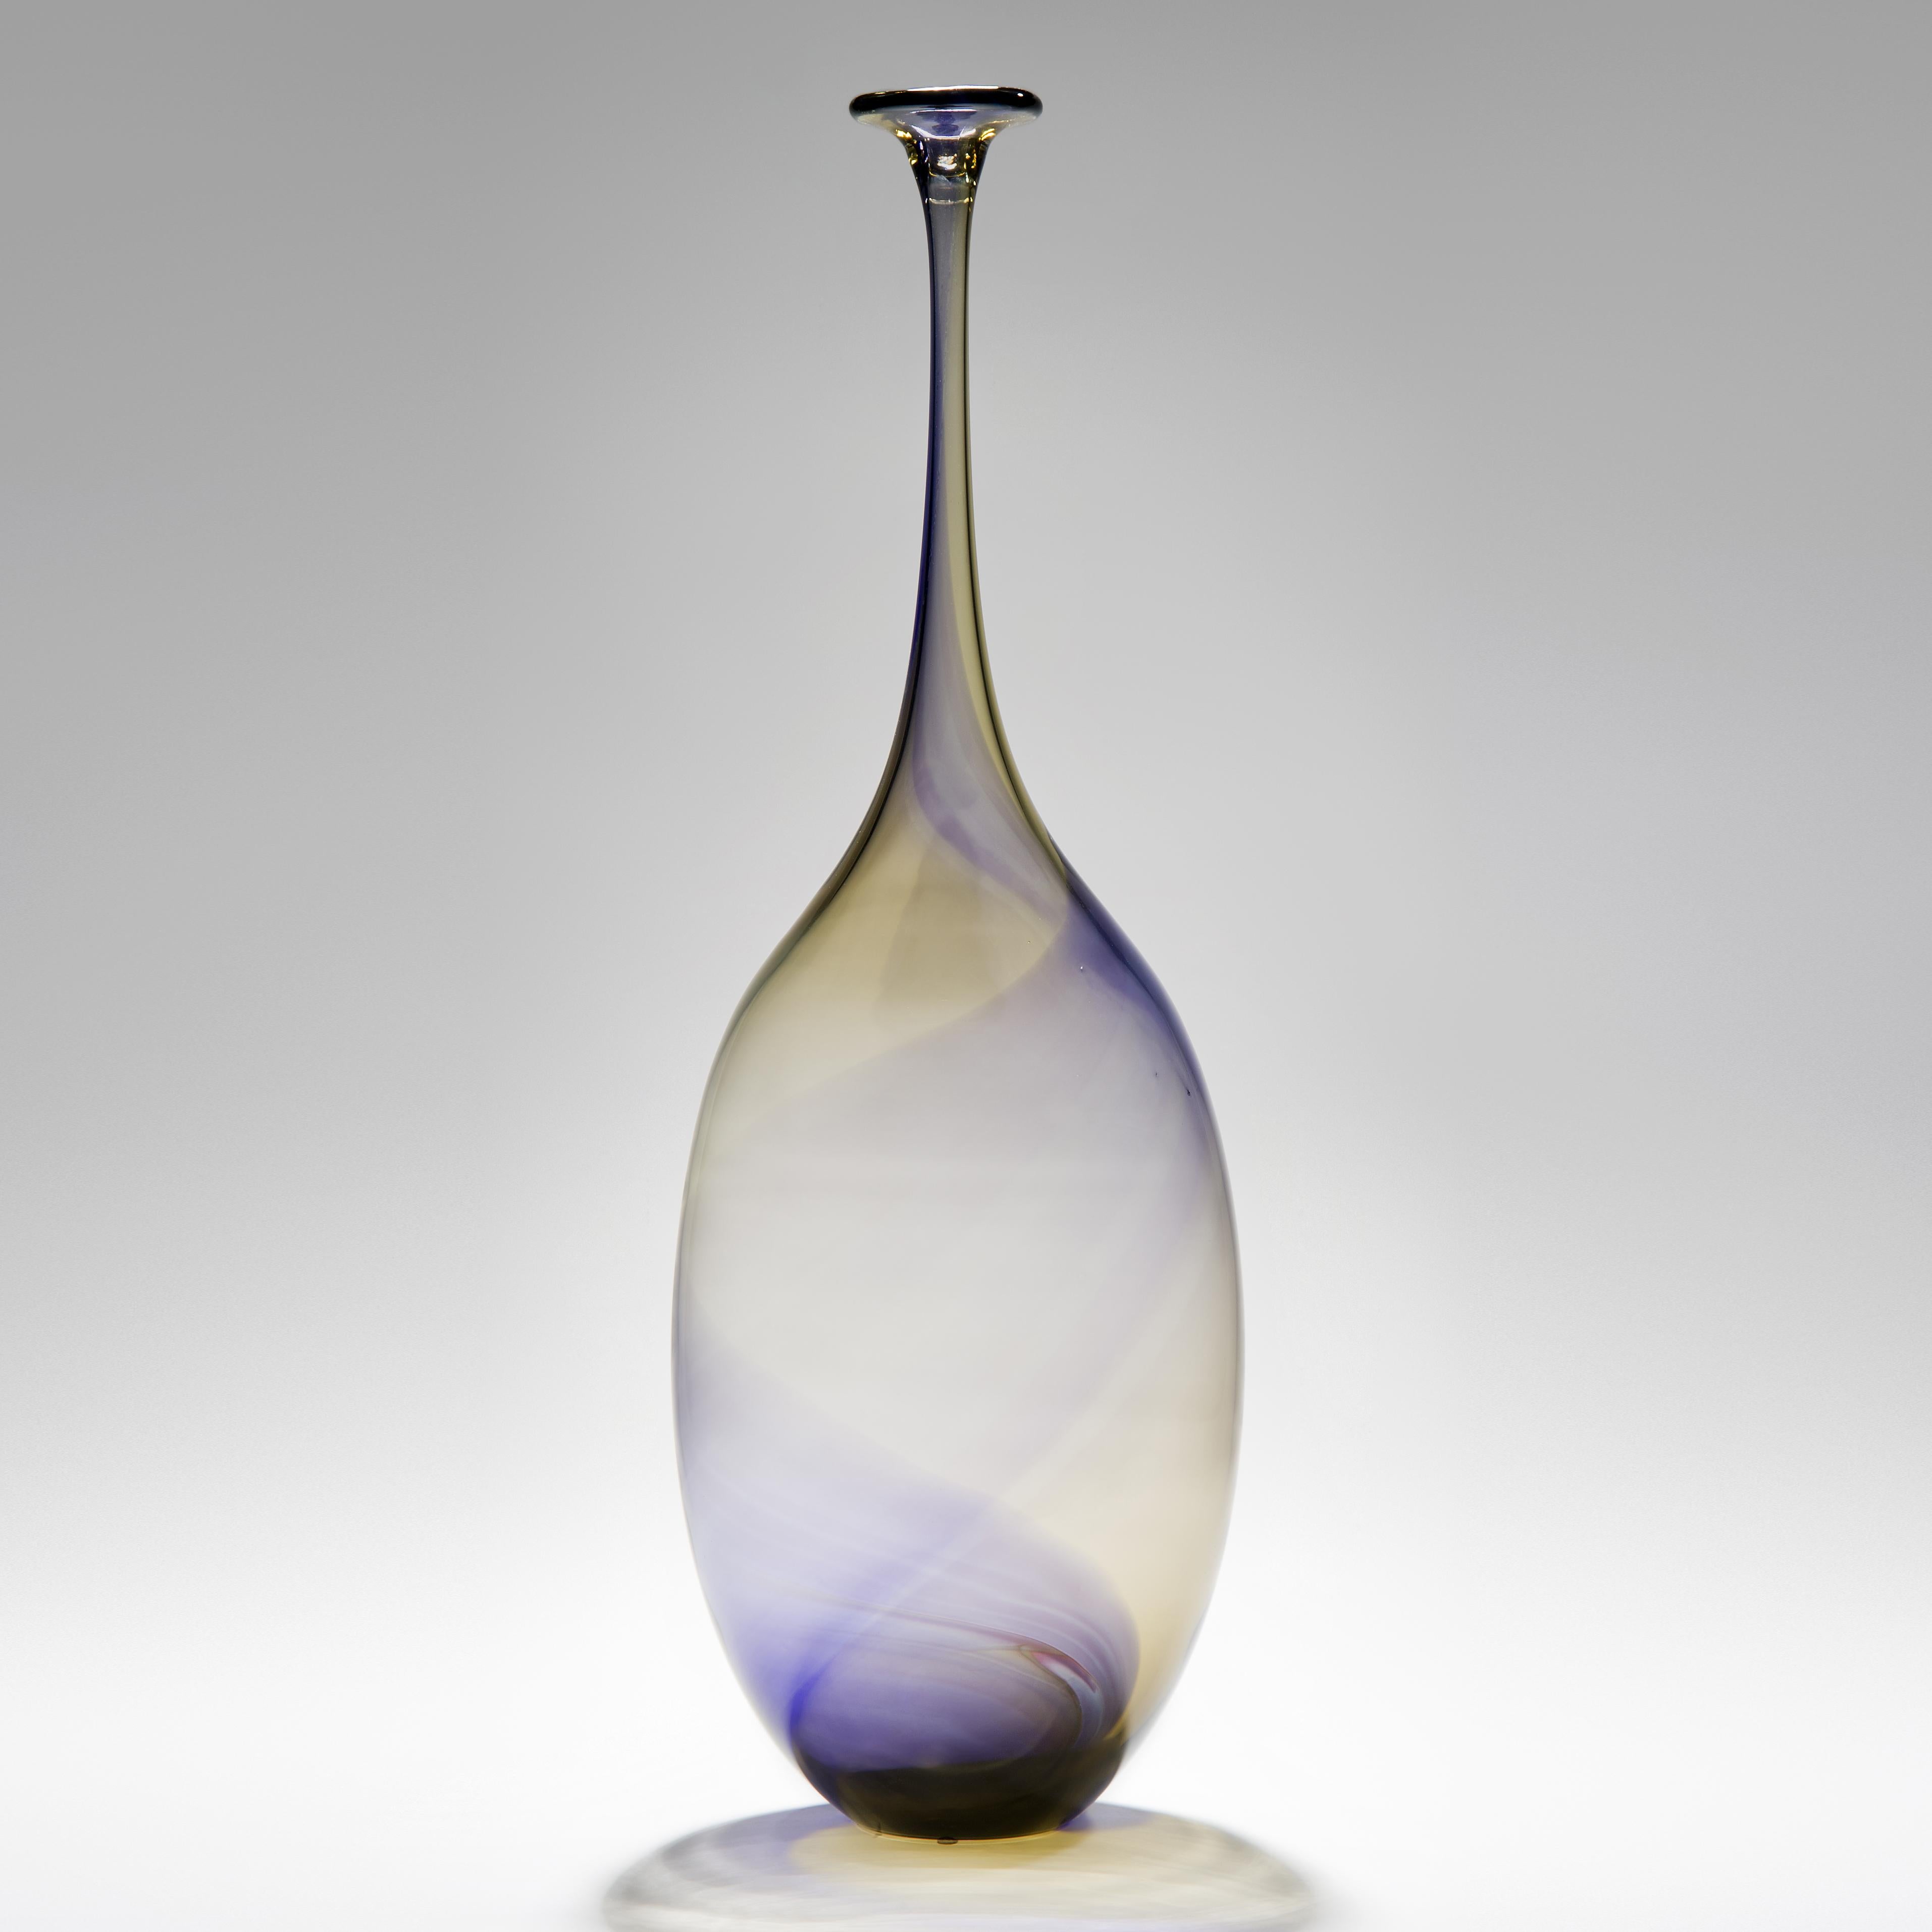 Fidji I is a unique bronze & purple sculptural tall bottle, by the Swedish artist Kjell Engman for Kosta Boda.

The Fidji series was inspired when Engman accidentally spilled oil into water. Remaining on the water's surface, the oil floated and